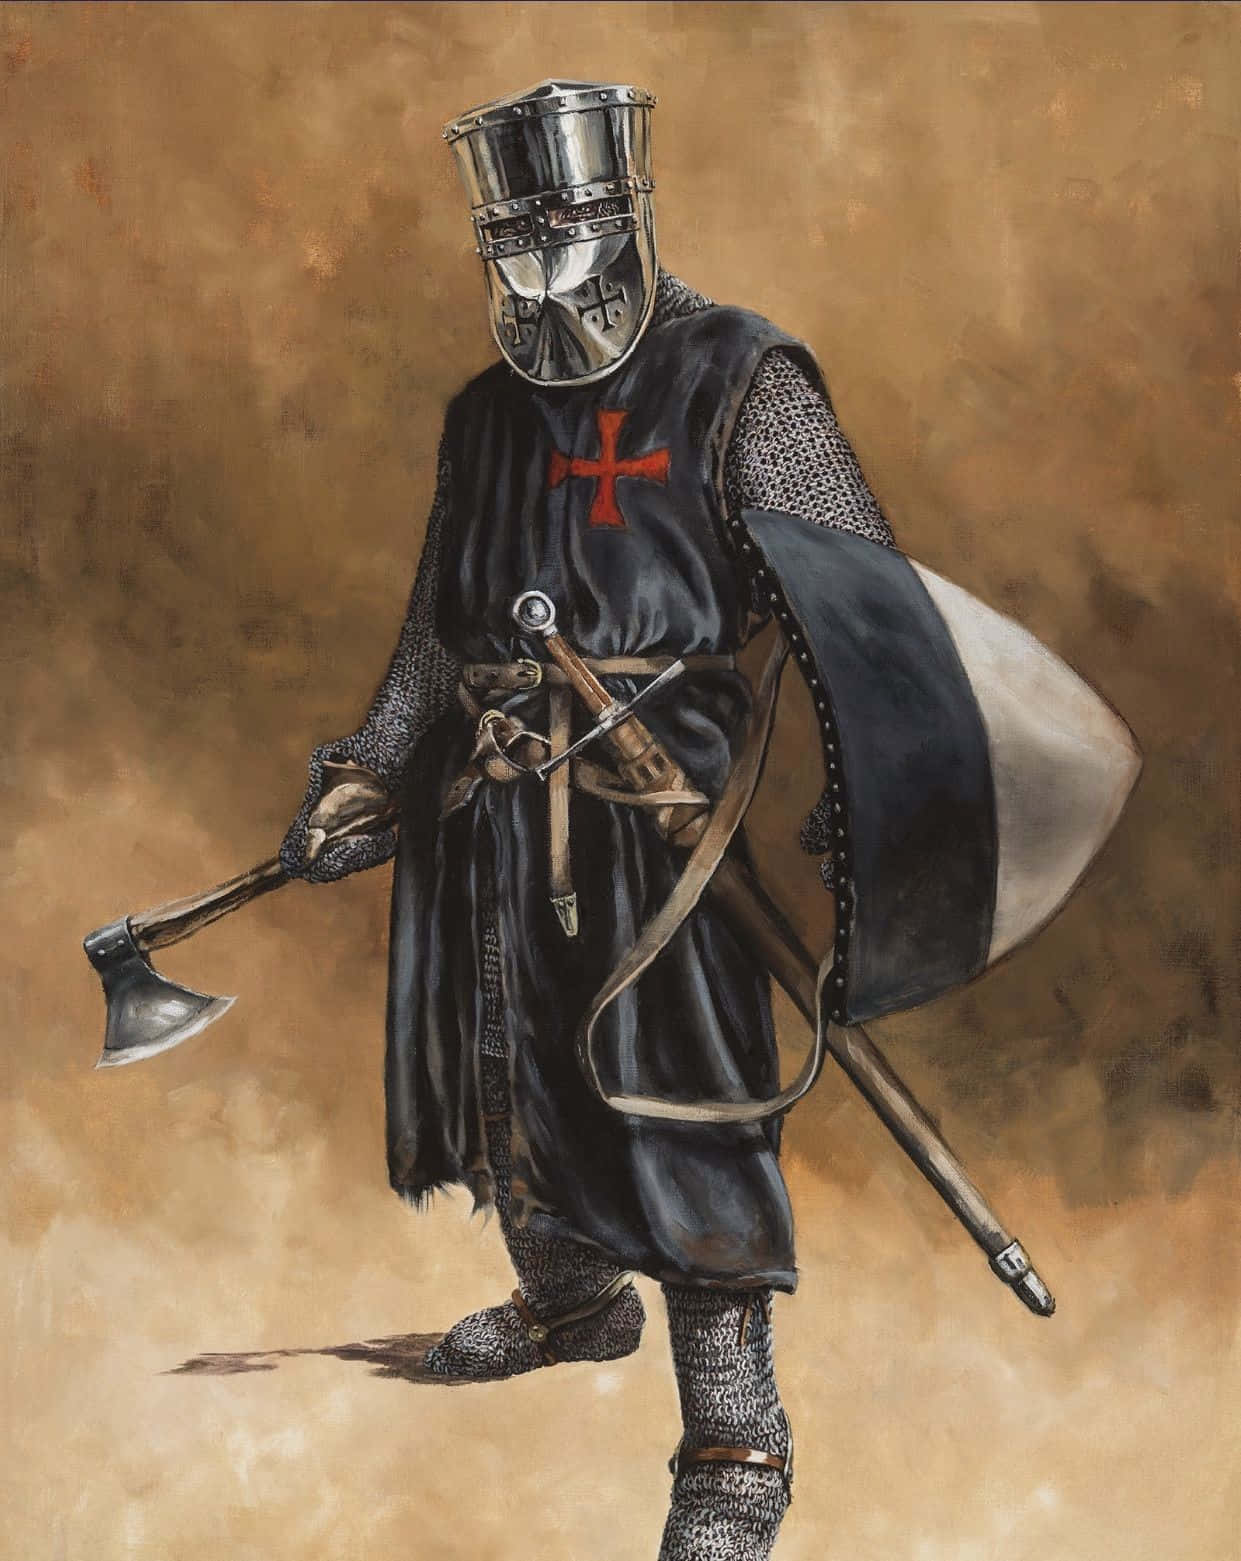 A Painting Of A Knight With An Axe And Shield